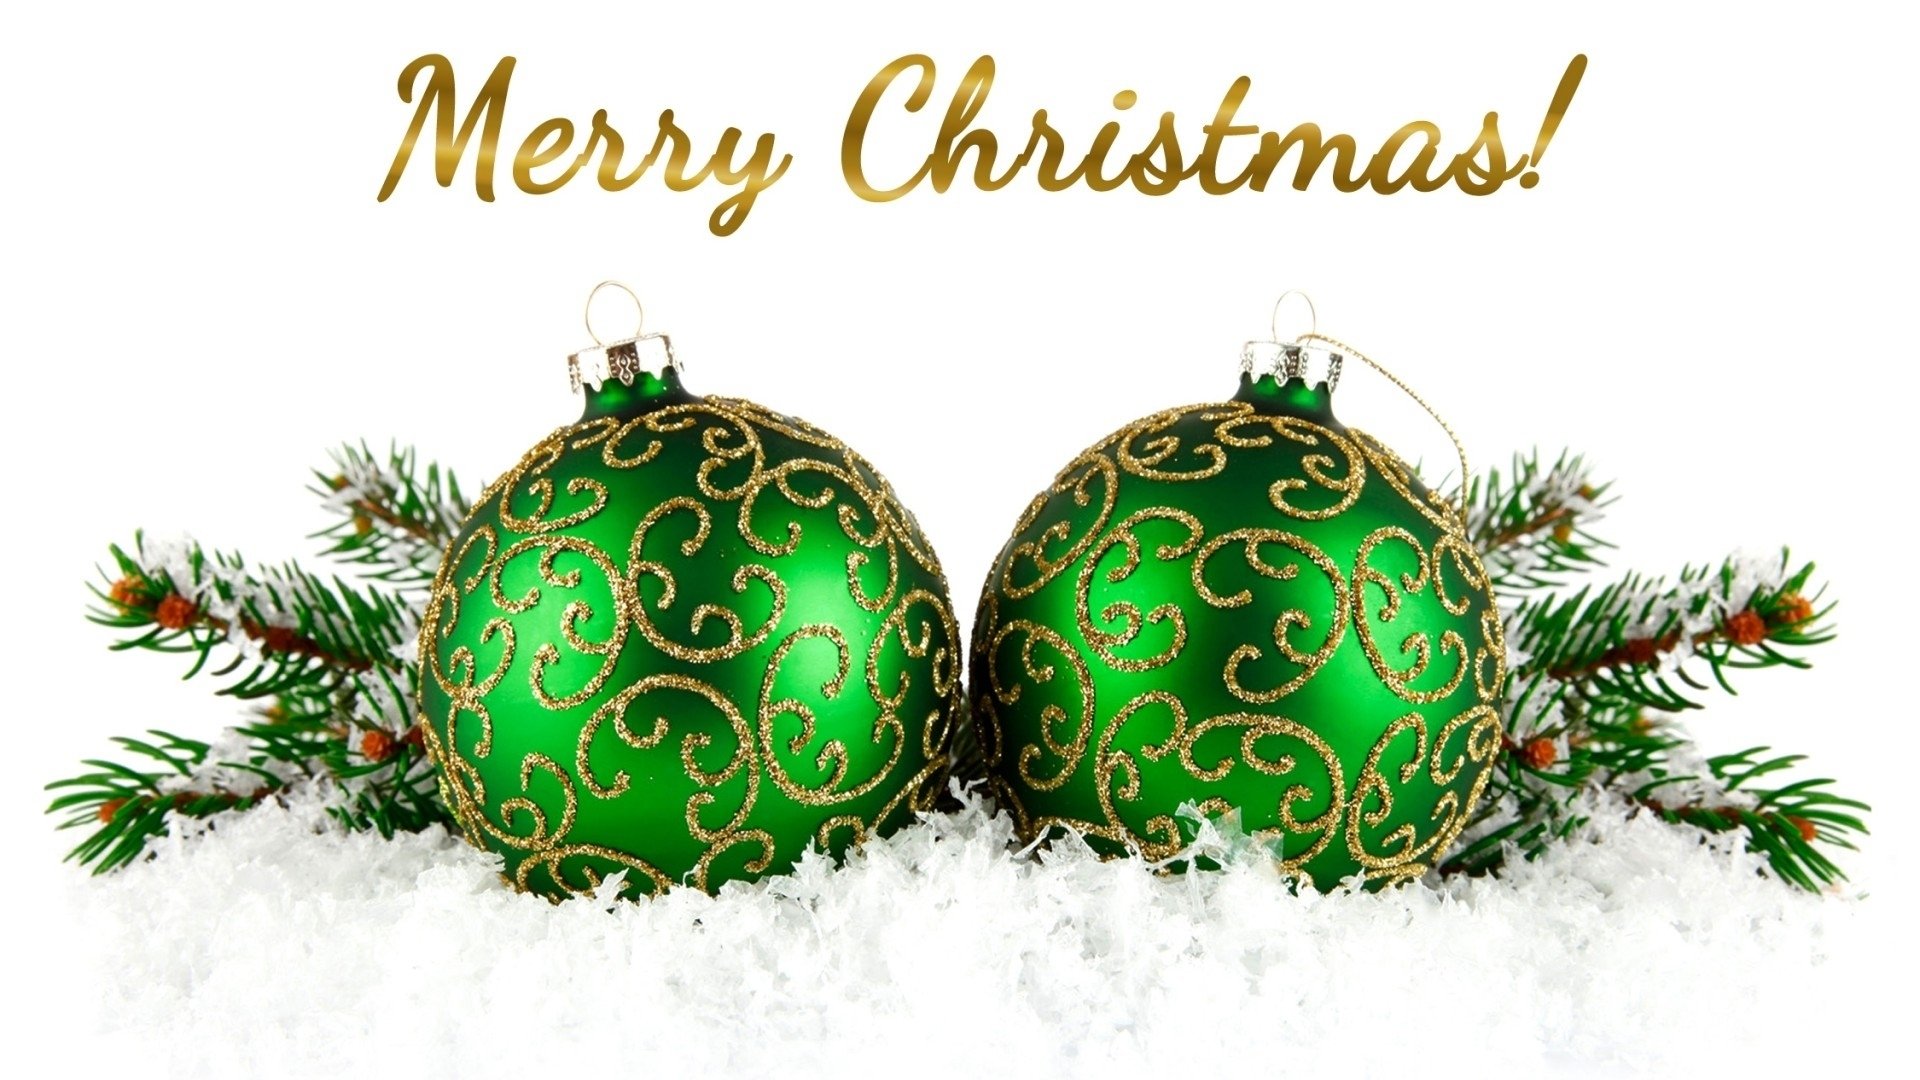 Merry Christmas HD Wallpaper Background Image